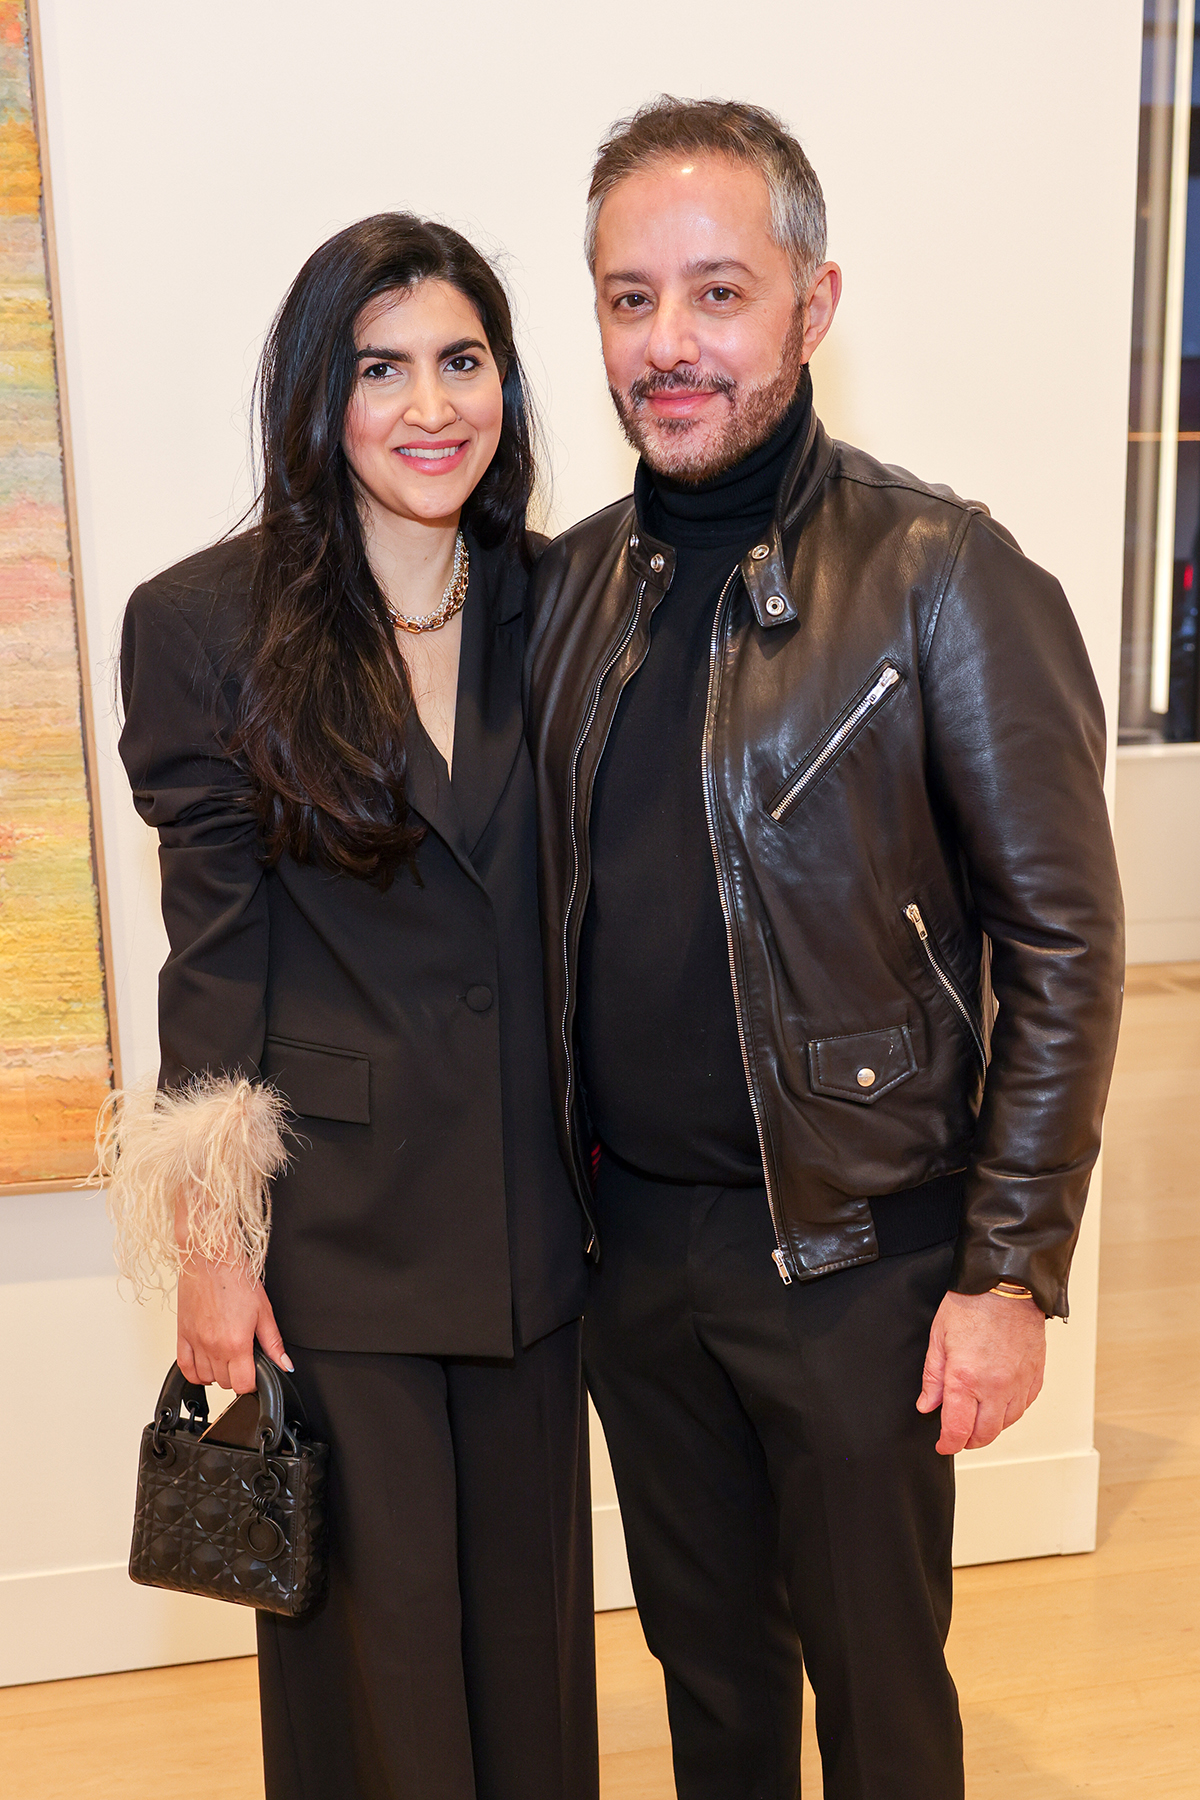 A man and woman wearing black outfits